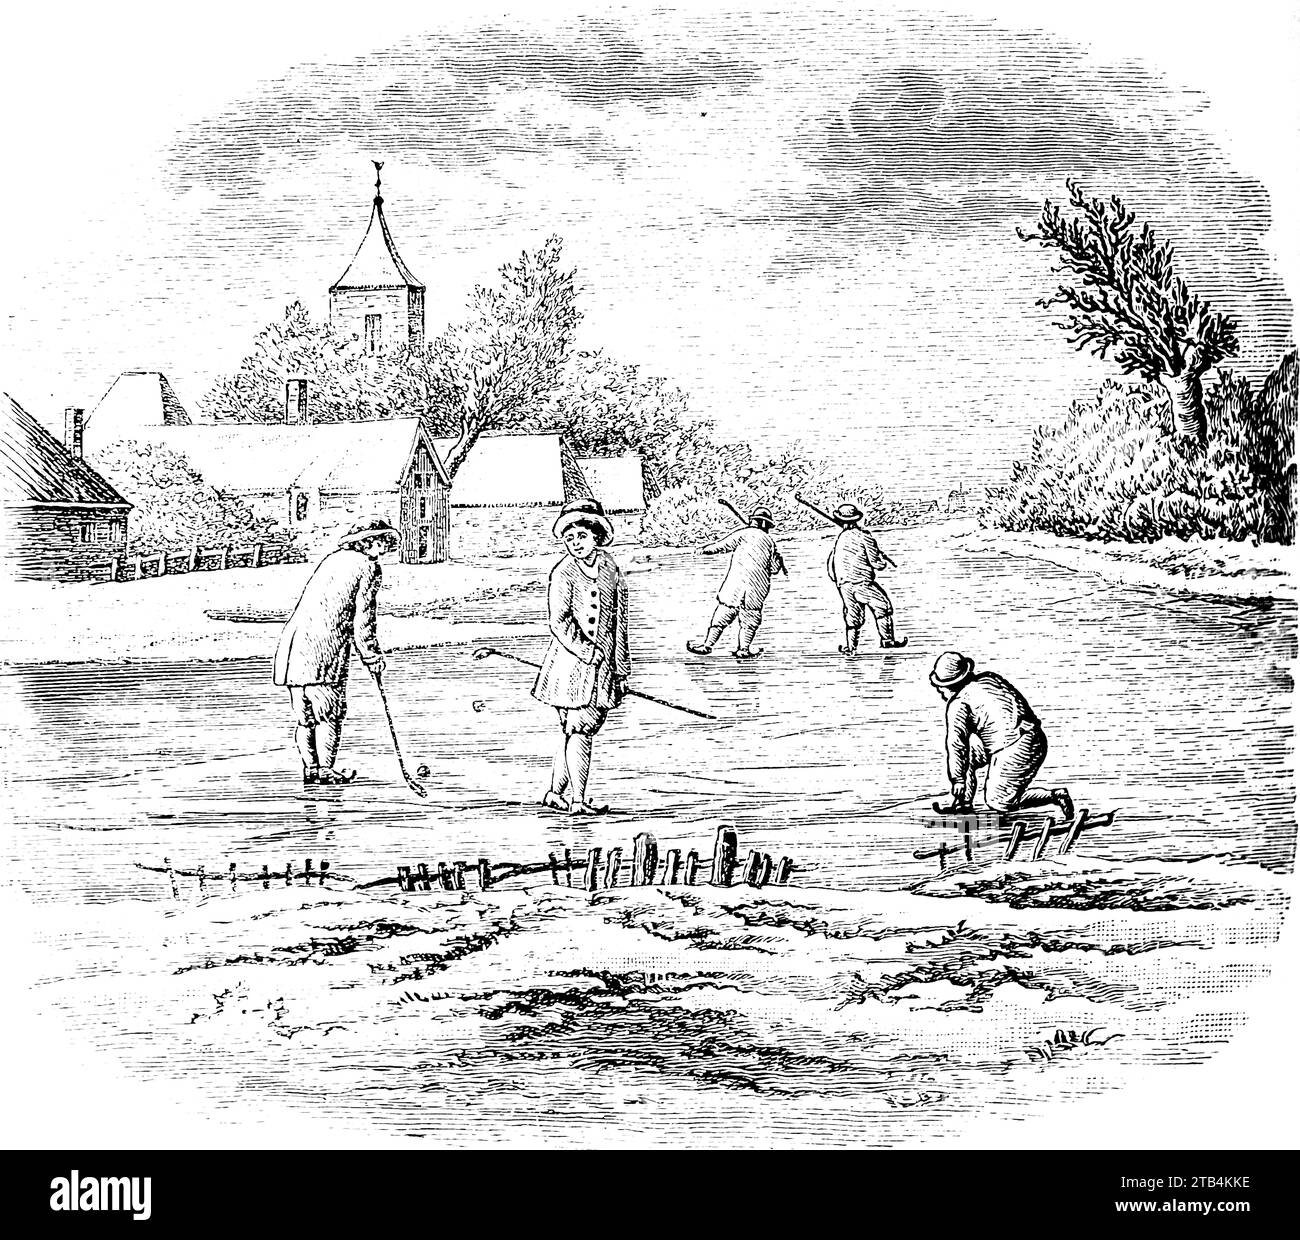 Golf being played on ice, unattributed. From an illustration about golf, dating from 1889 to 1901. The history of golf is a long one. Though its origins are disputed, historians are generally agreed that what is known as “modern” golf began in the Middle Ages in Scotland. It was not until the mid to late nineteenth century that this sport became more popular in wider Britain, the British Empire and then the United States. Over the years the humble golf ball and golf club have changed vastly. Stock Photo